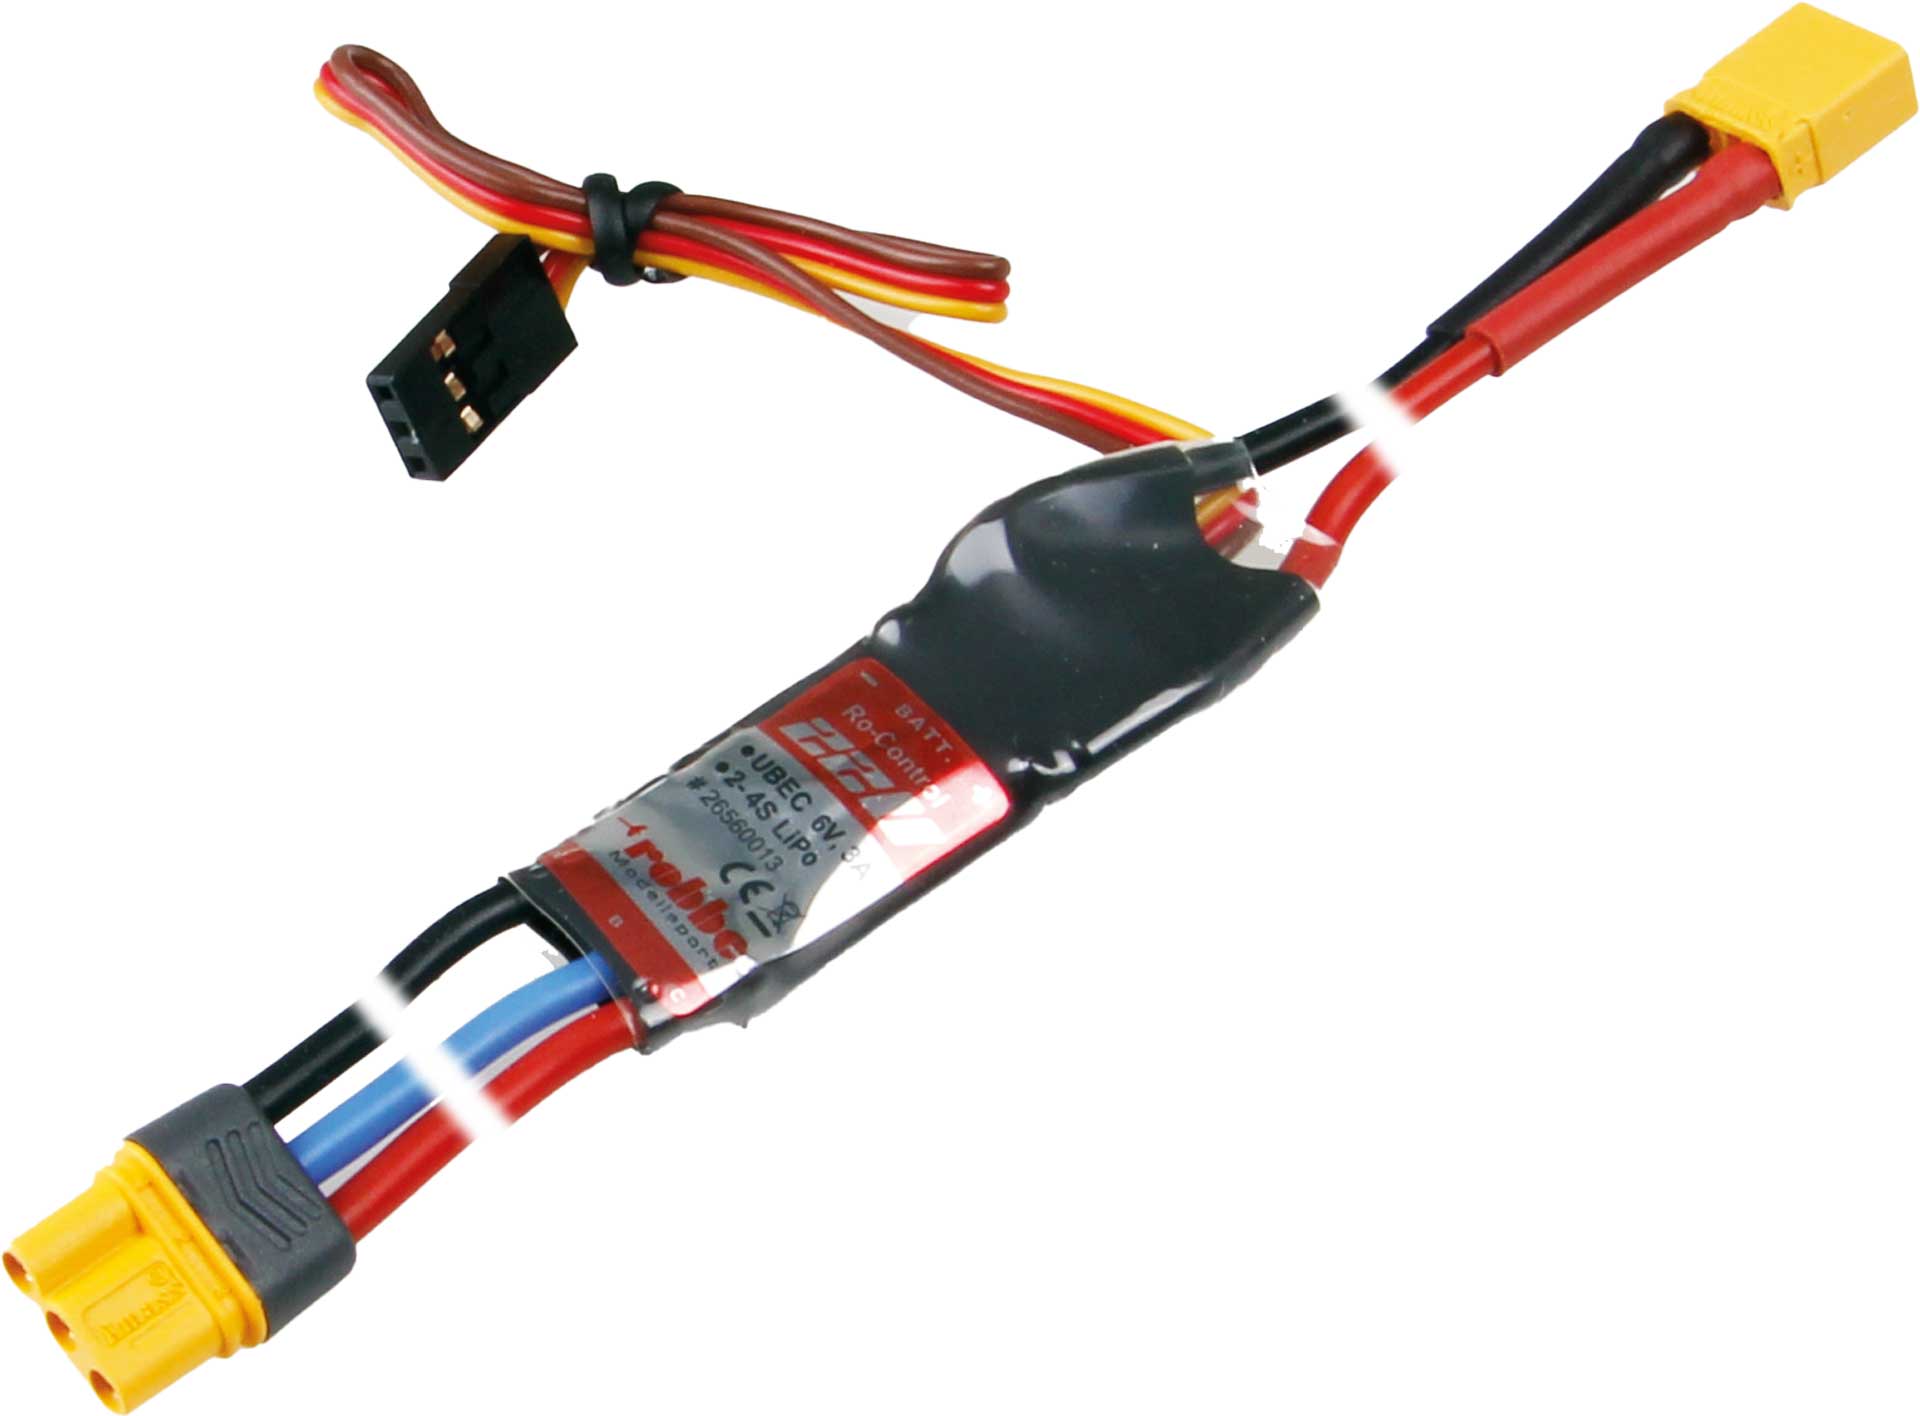 Robbe Modellsport RO-CONTROL 22 LITE WITH MR30/XT30 WINGO 2 CONNECTOR SYSTEM